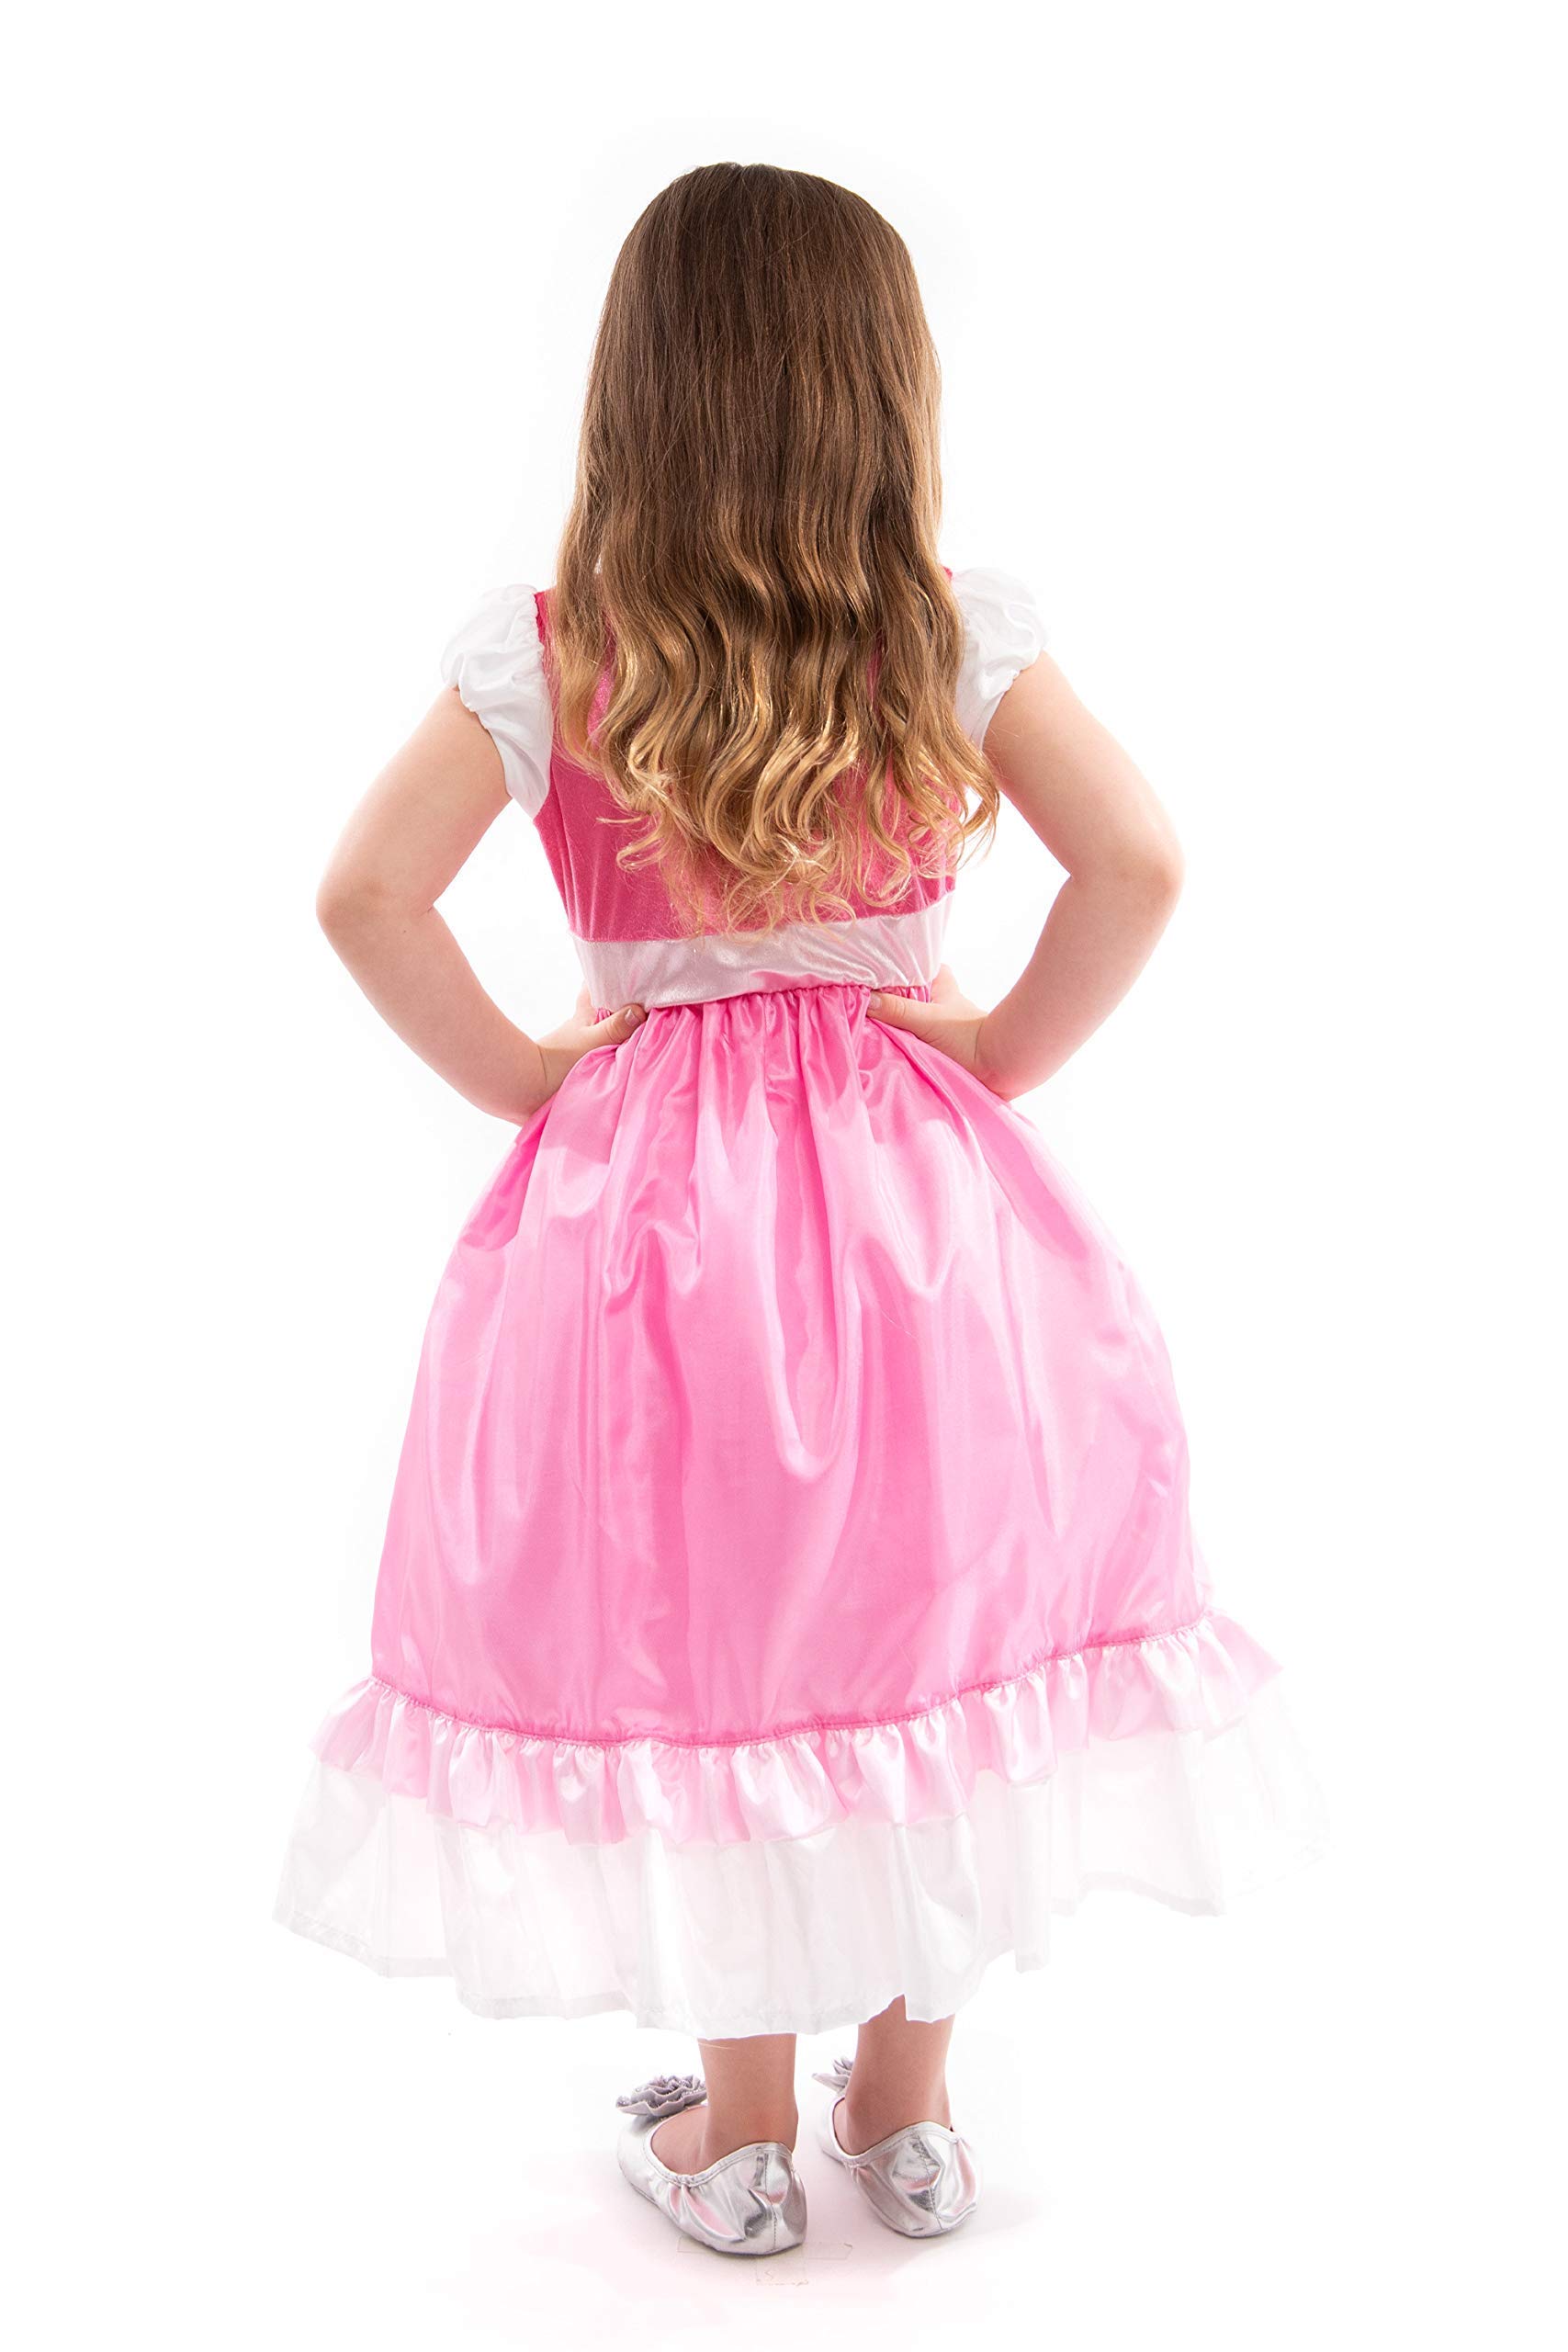 Little Adventures Cinderella Pink Ball Gown Dress up Costume (Med Age 3-5) with Matching Doll Dress - Machine Washable Child Pretend Play and Party Dress with No Glitter